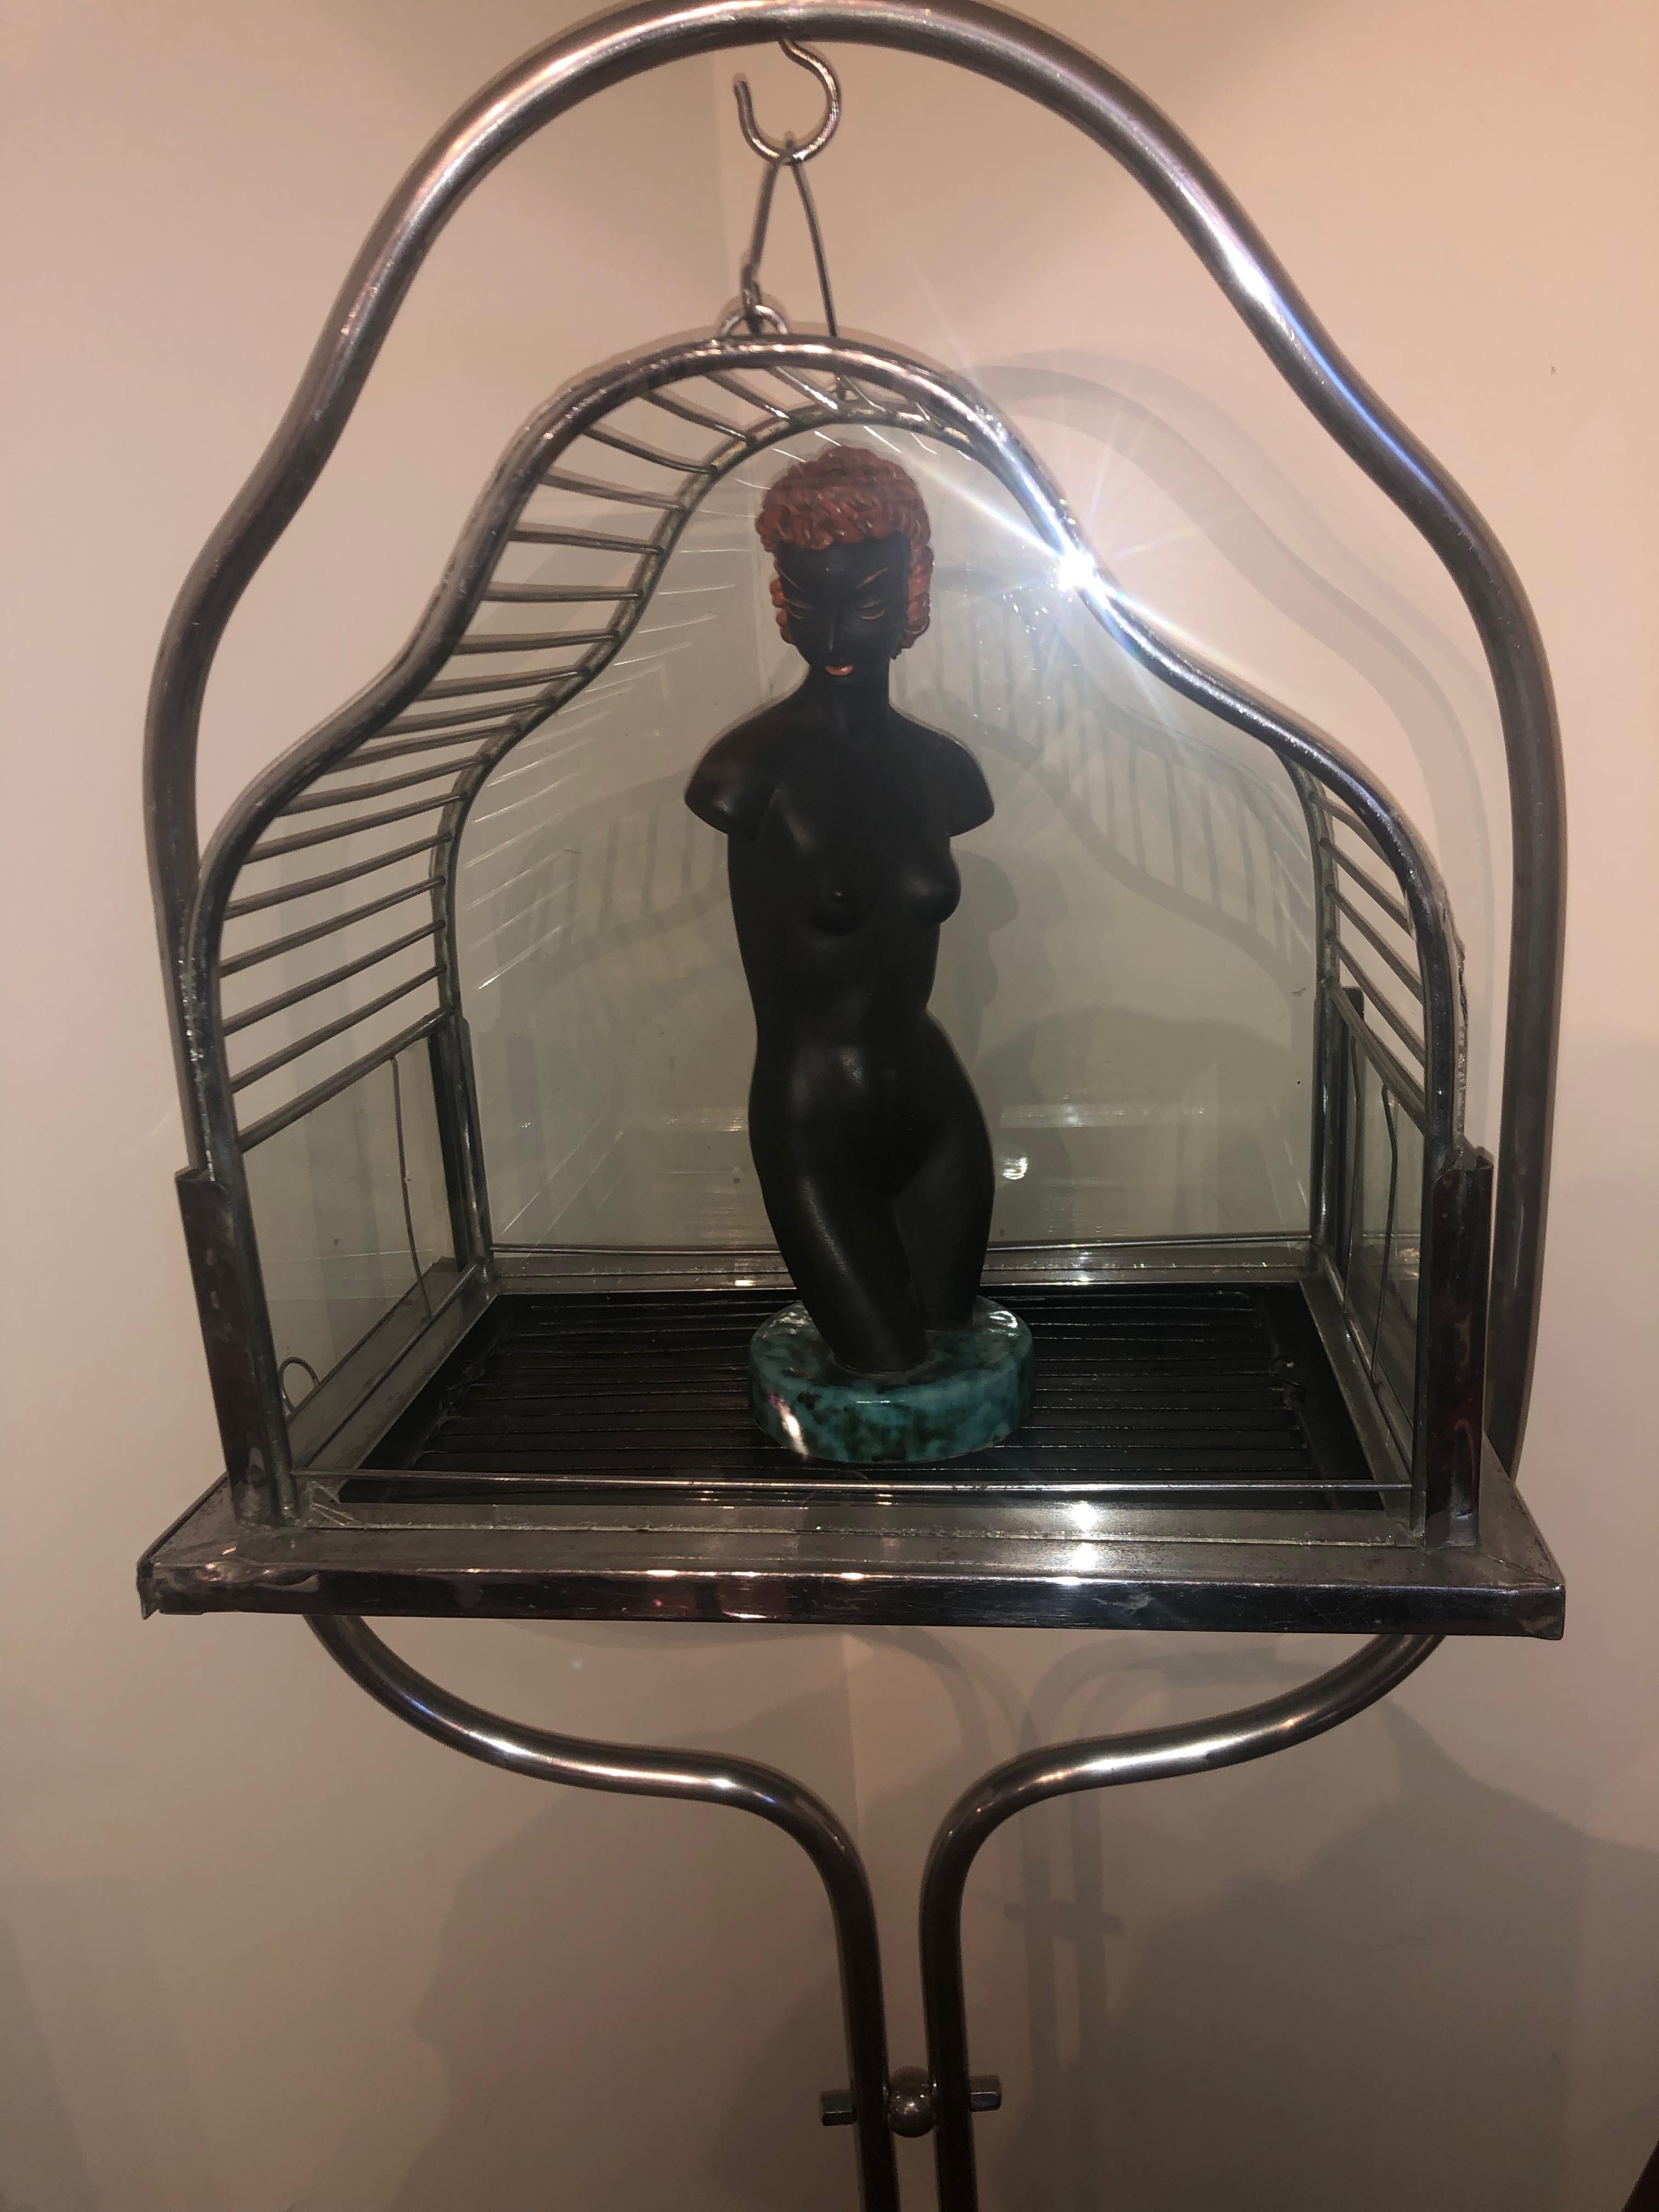 Art Deco bird cage on stand. Simple chrome details with modern Bauhaus base design. This is in very nice original condition, with a typical gate or door entry. Front and back glass shapes outline the cage with simple rectangular glass on the outside